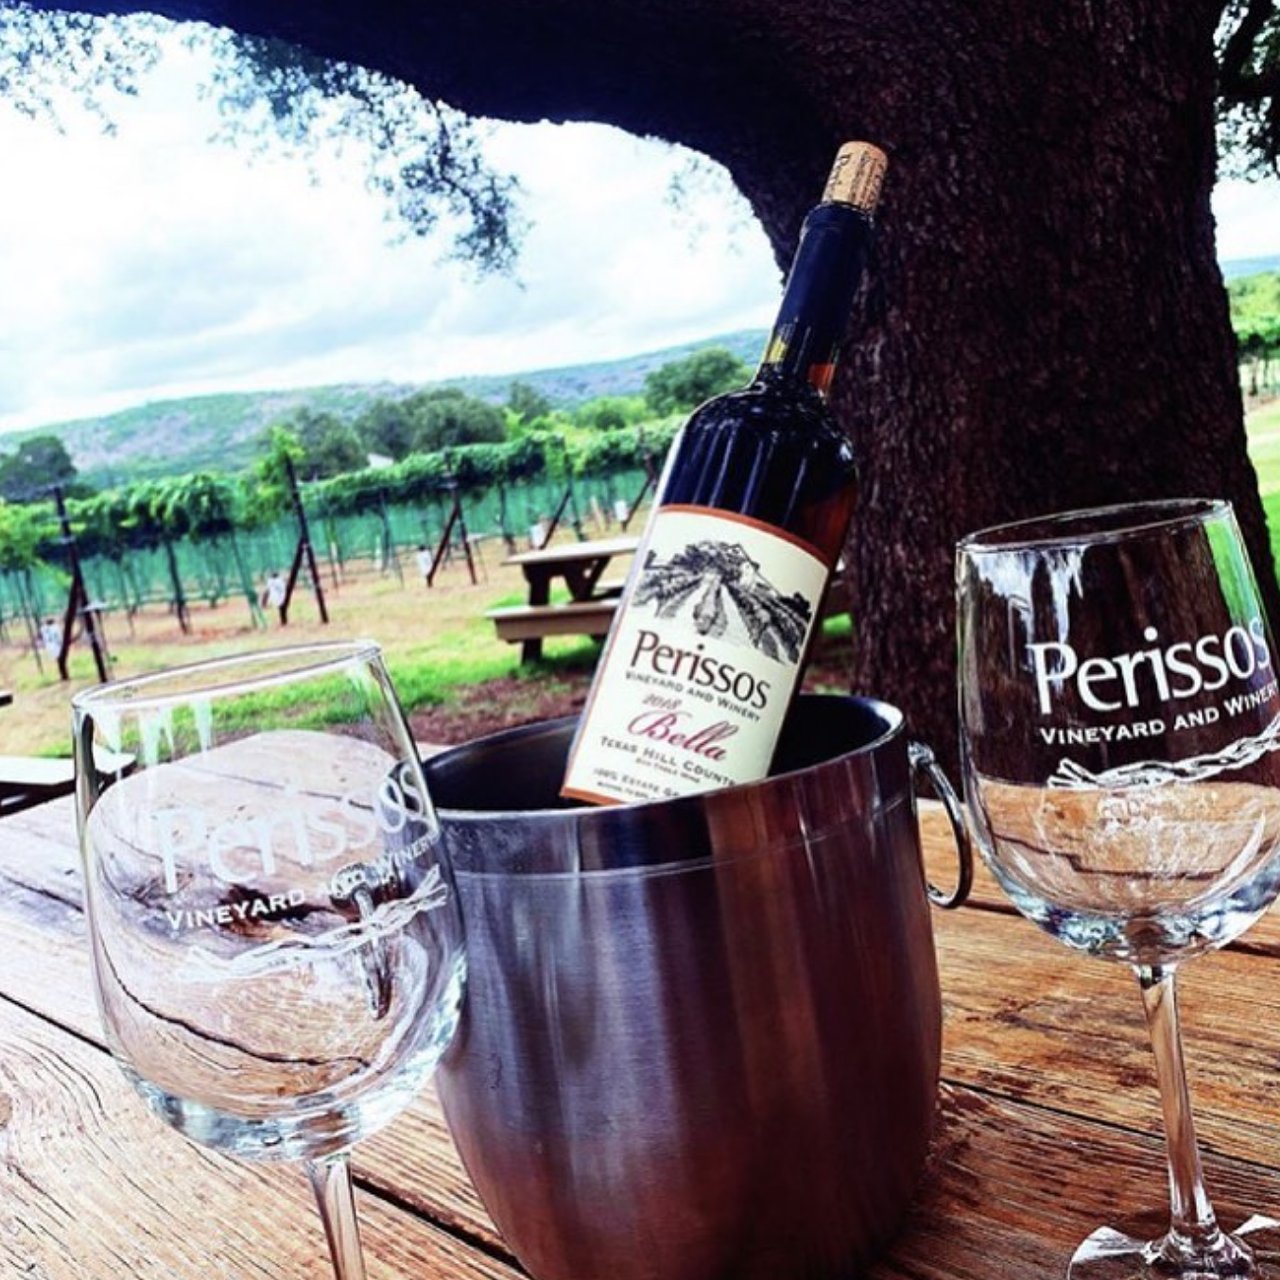 Perissos Vineyard & Winery
7214 Park Rd 4 W, Burnet, TX, (512) 820-2950, perissosvineyards.comThis Burnet venue would definitely be a day-trip, but when you consider the on-premise restaurant, spacious tasting room and ample outdoor space, it’d be easy to spend your day here.
Photo via Instagram / officialperissosvineyards